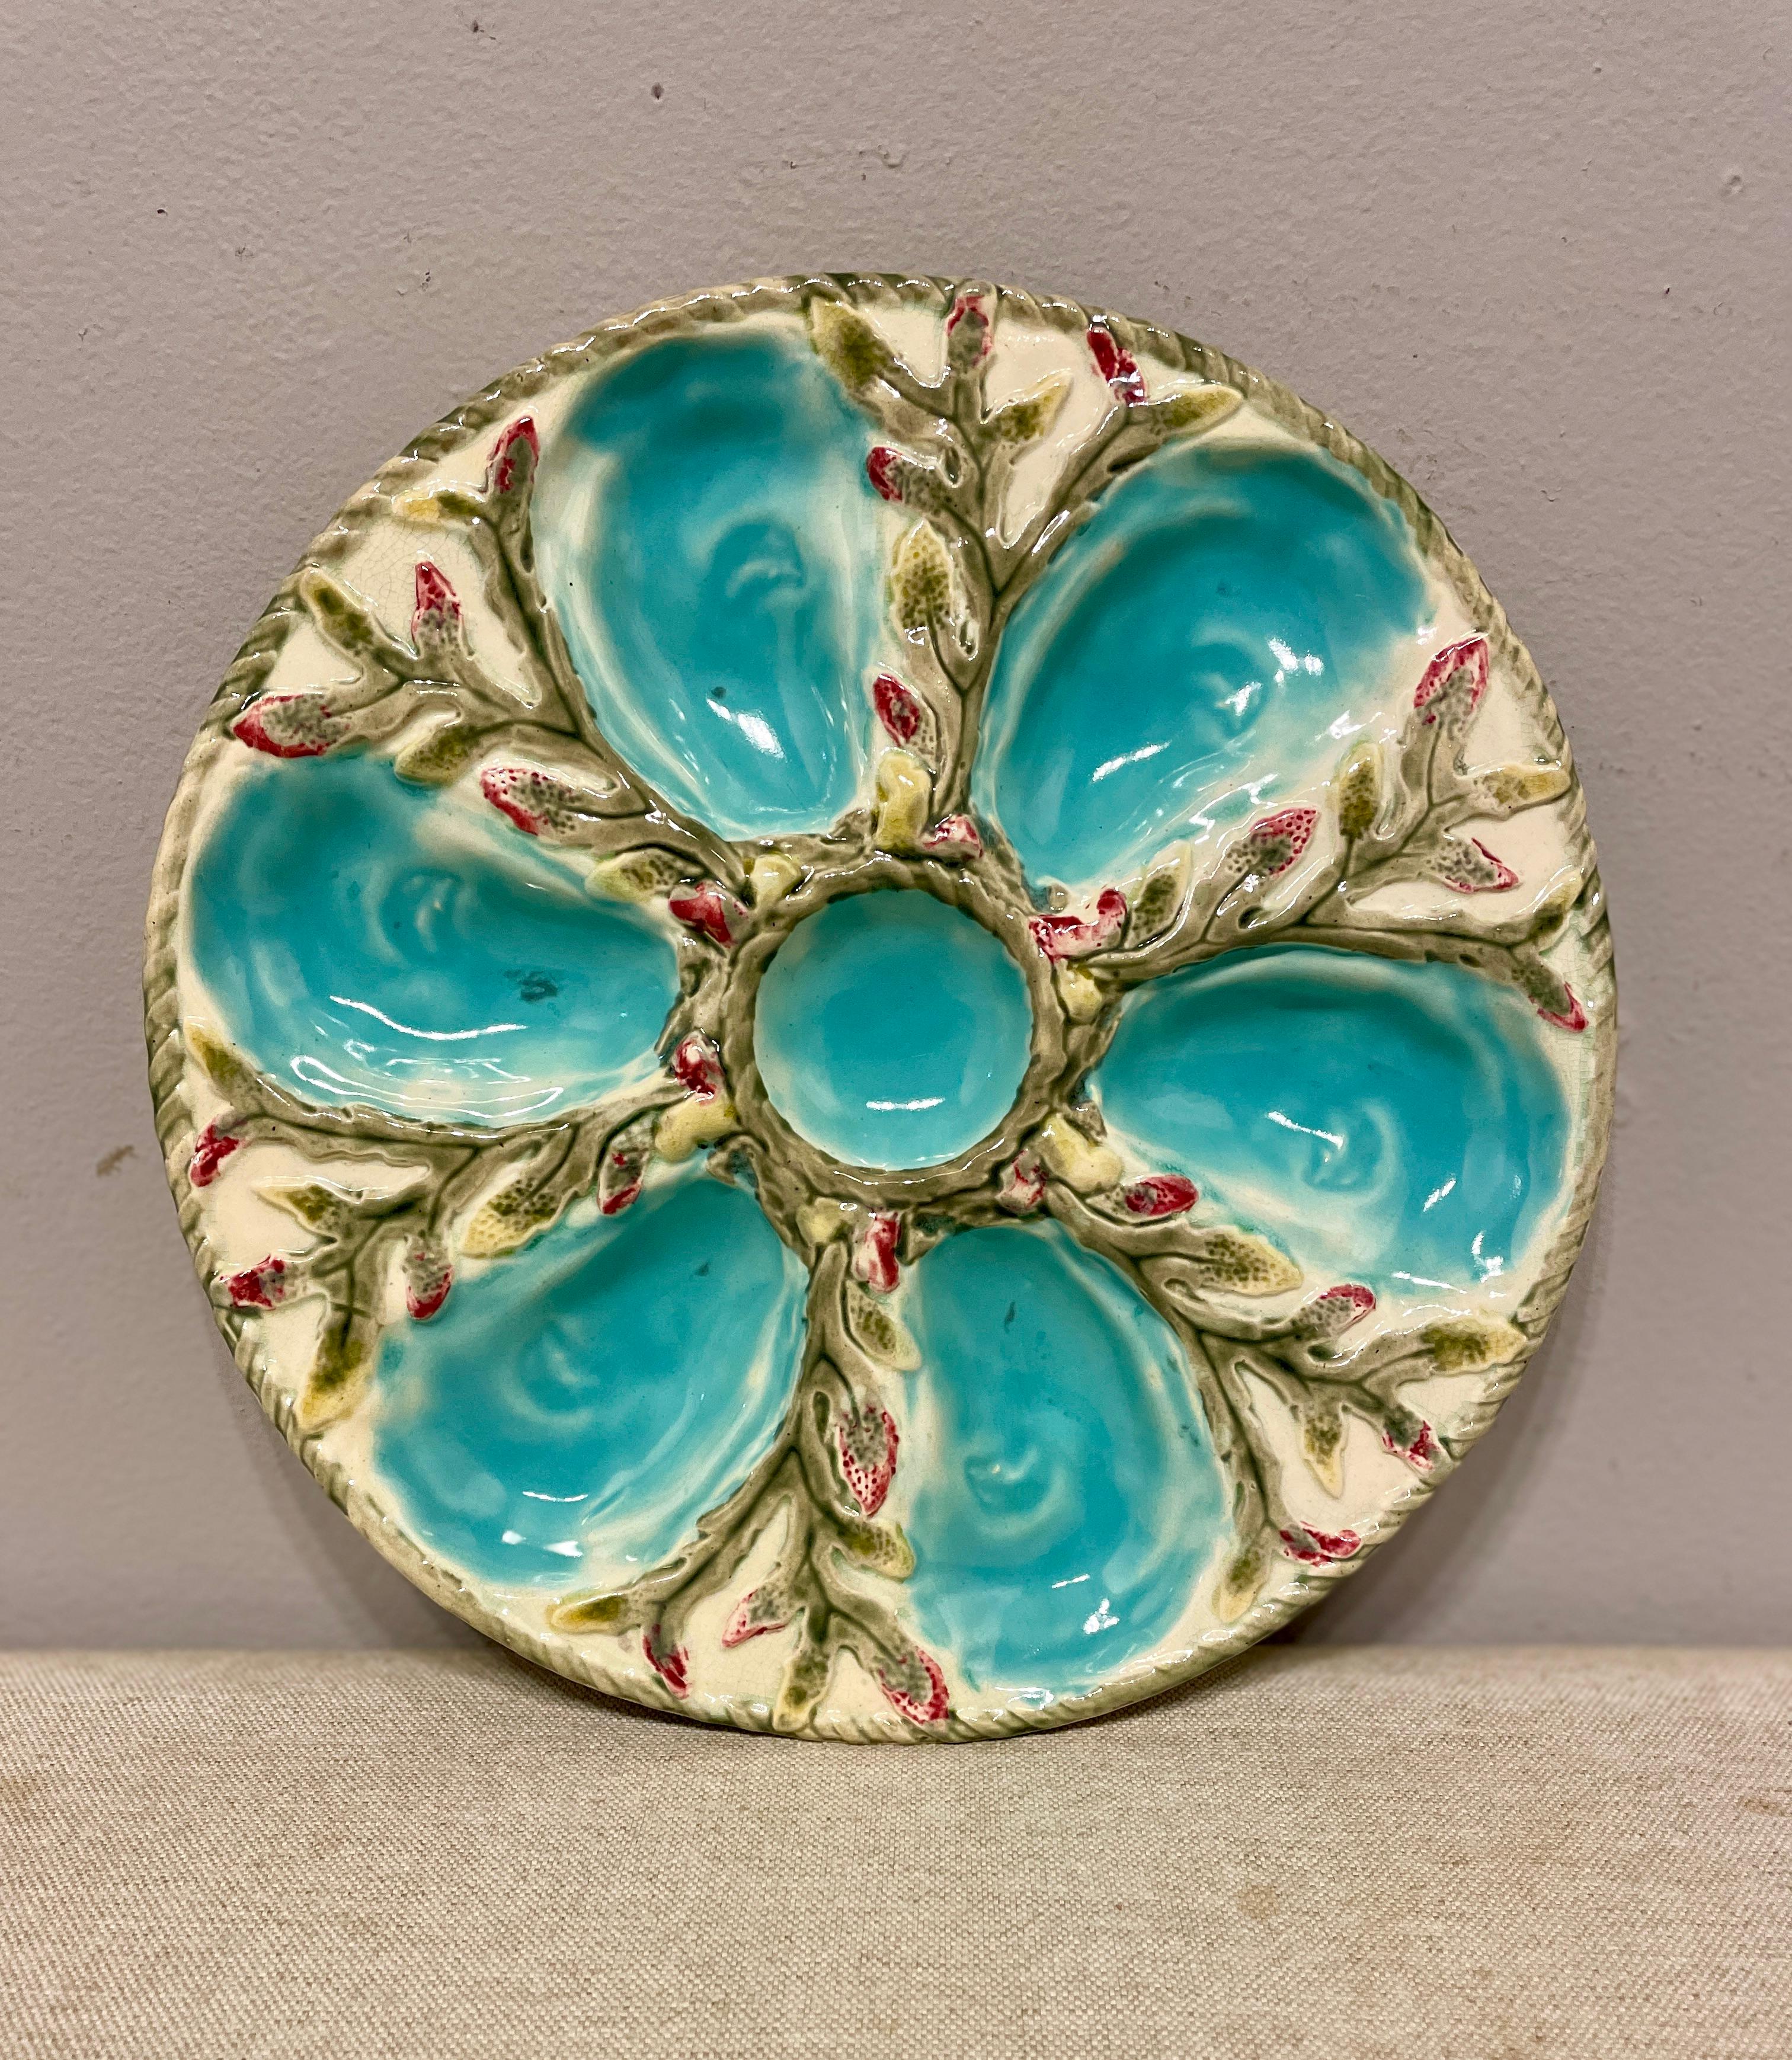 A 19th Century English glazed majolica oyster plate with six turquoise blue oyster wells surrounding a center well for sauce on cream ground with seaweed relief accented with yellow and red. A pale green nautical rope border encircles the center